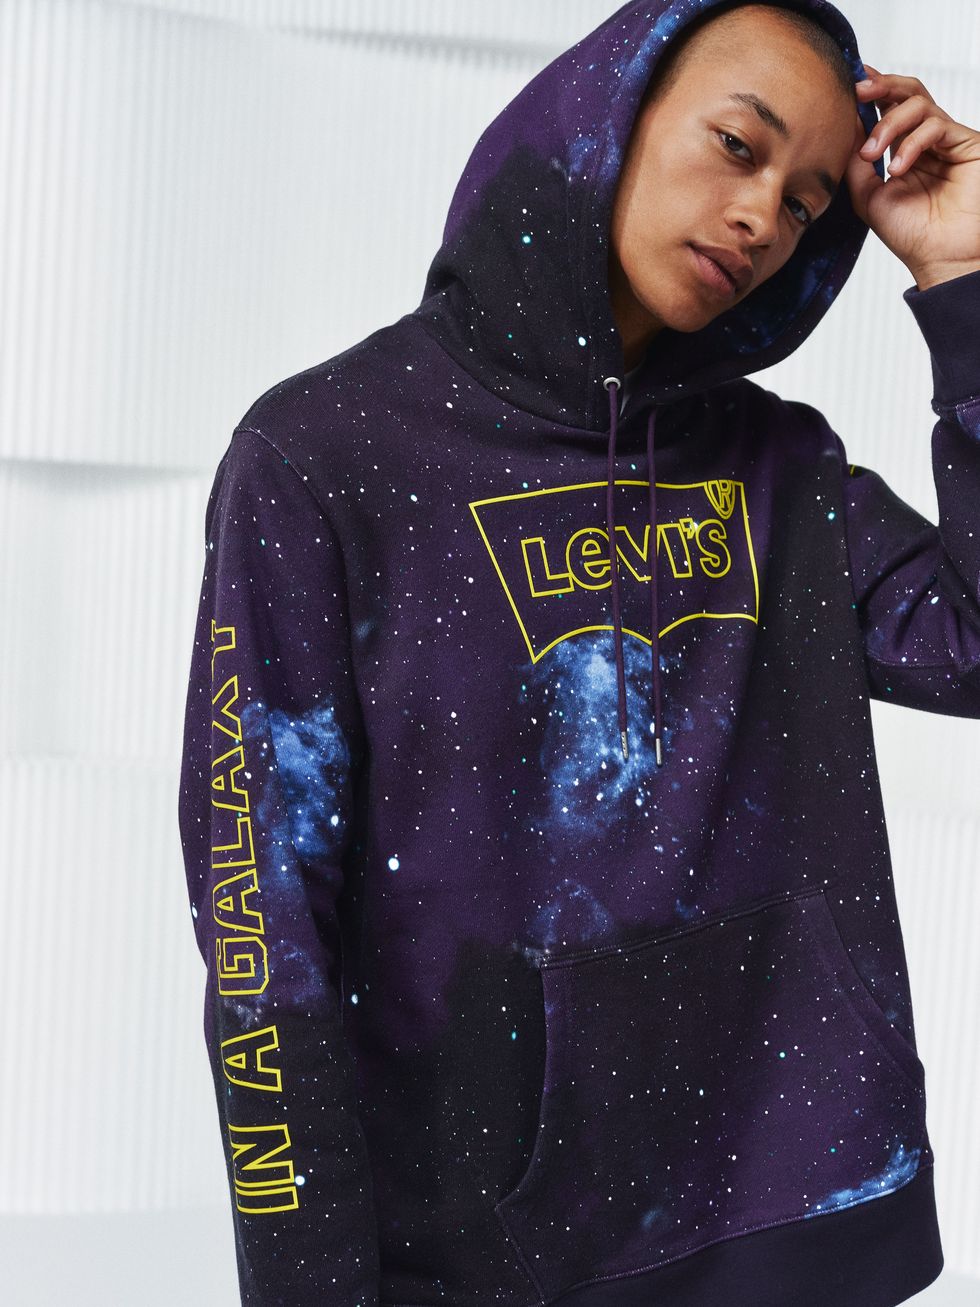 Levi's Will Collaborate With 'Star Wars' This November